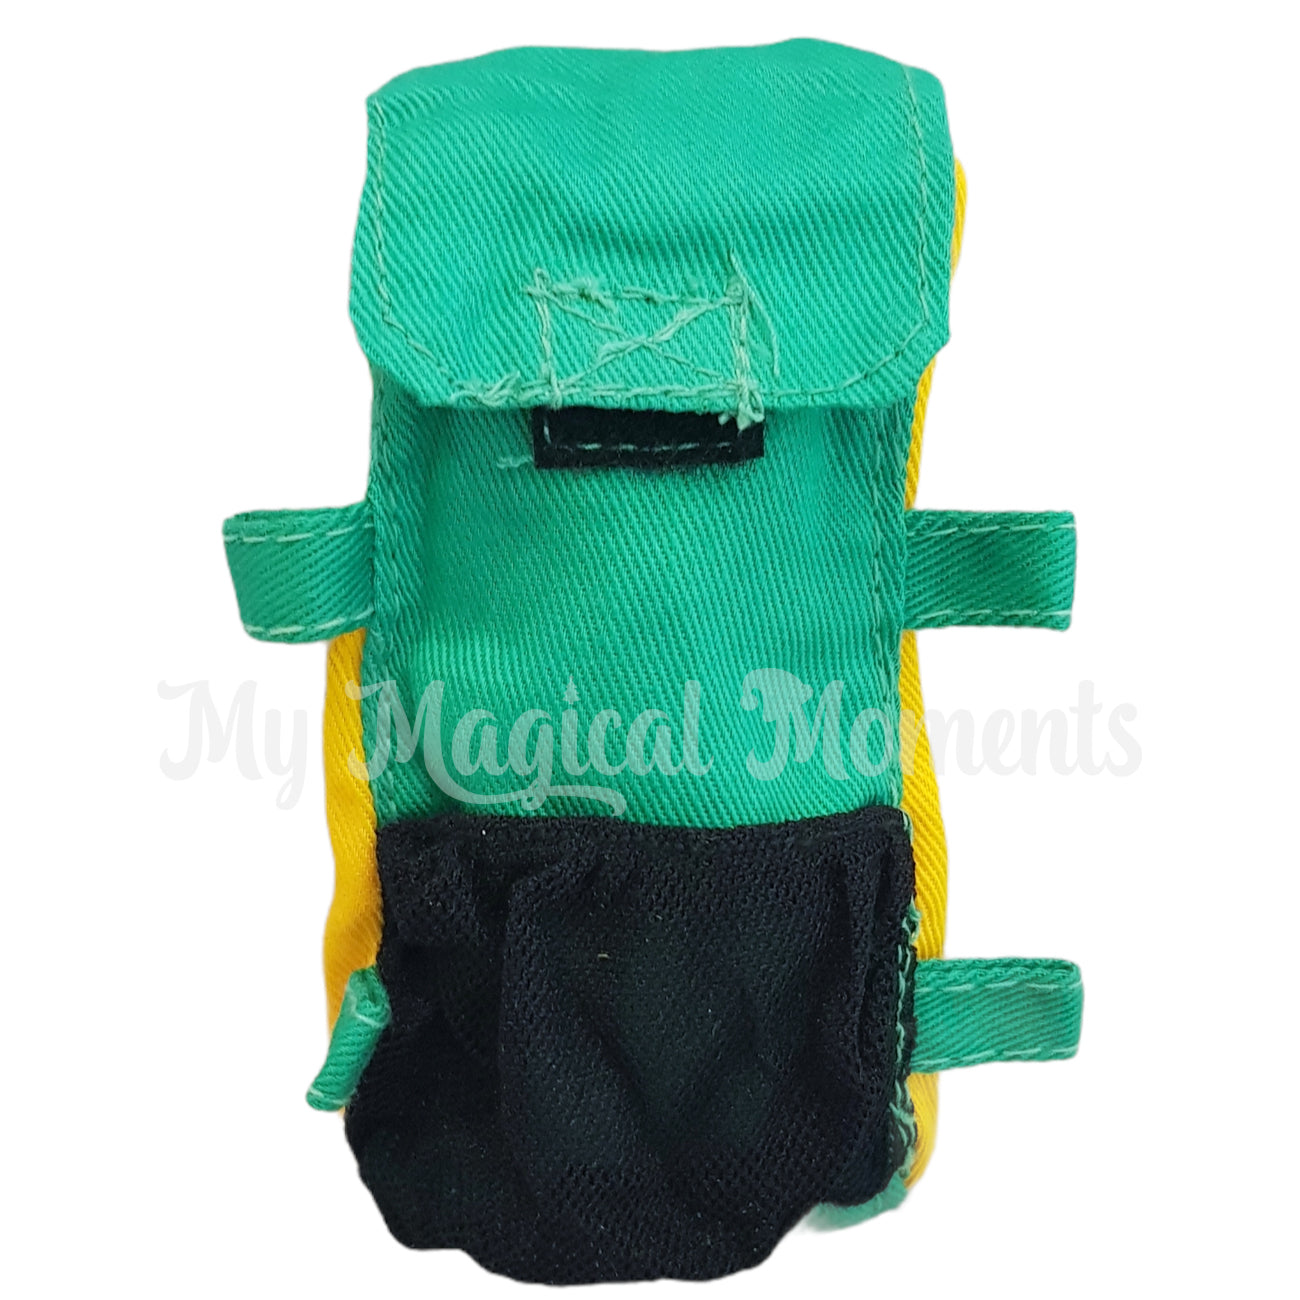 Miniature elf backpack. Green bag with yellow sides and mesh front pocket